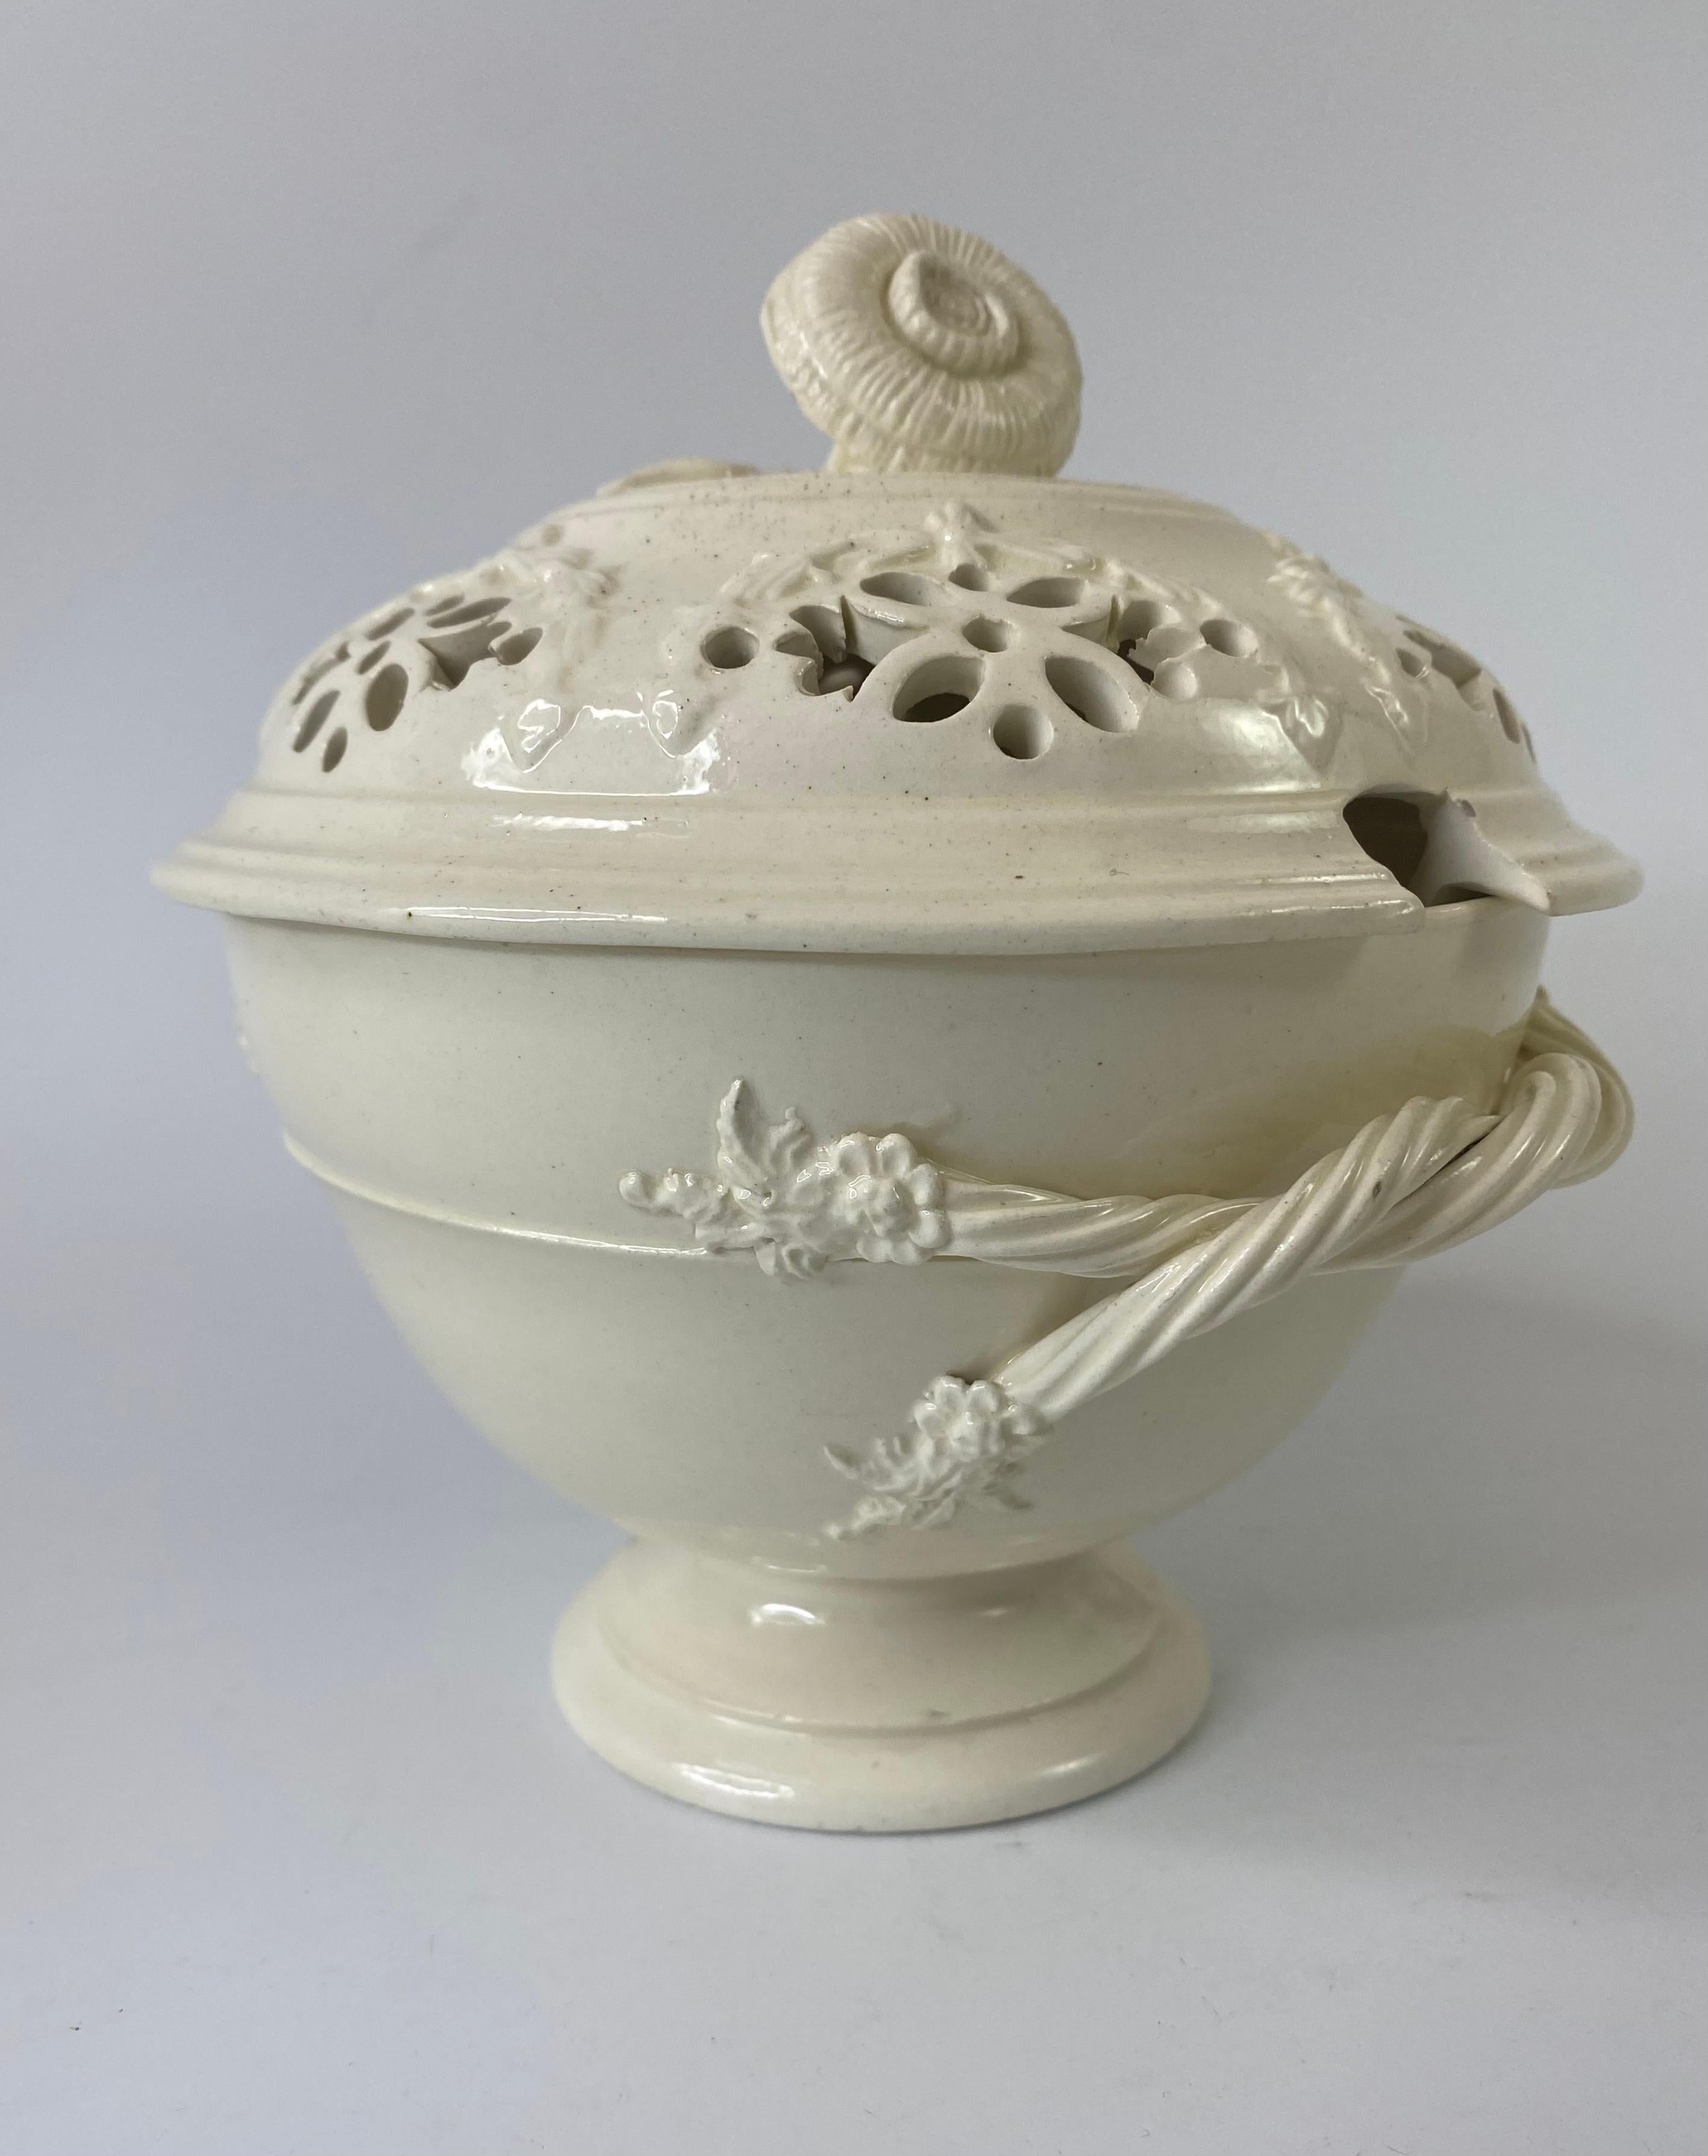 Fired English Creamware Tureen, Cover, Ladle and Stand, C. 1790